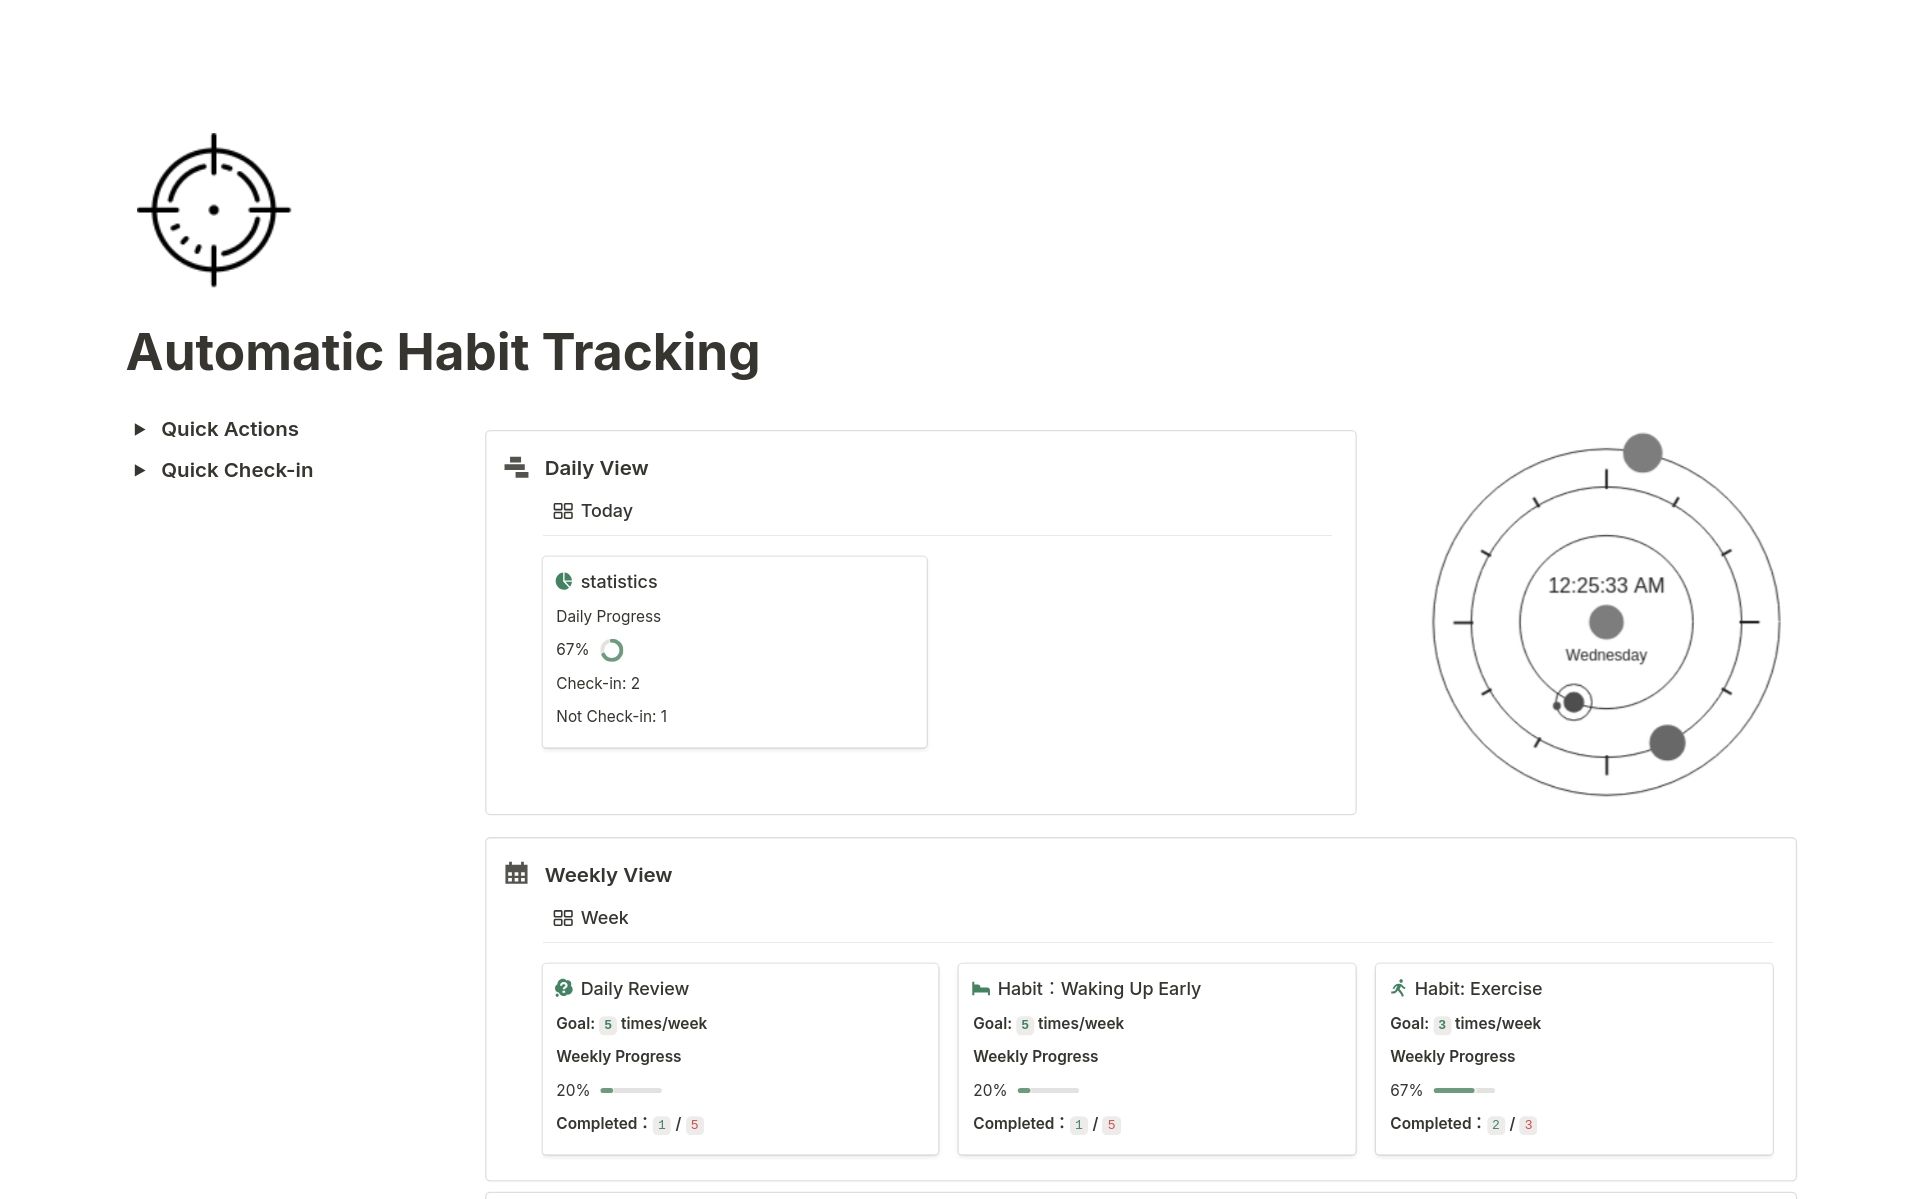 Unlike other habit tracker templates, our improved version includes a calendar view that makes it super easy to see your daily check-ins. This unique feature, crafted with great care, lets you track your progress smoothly and effortlessly.